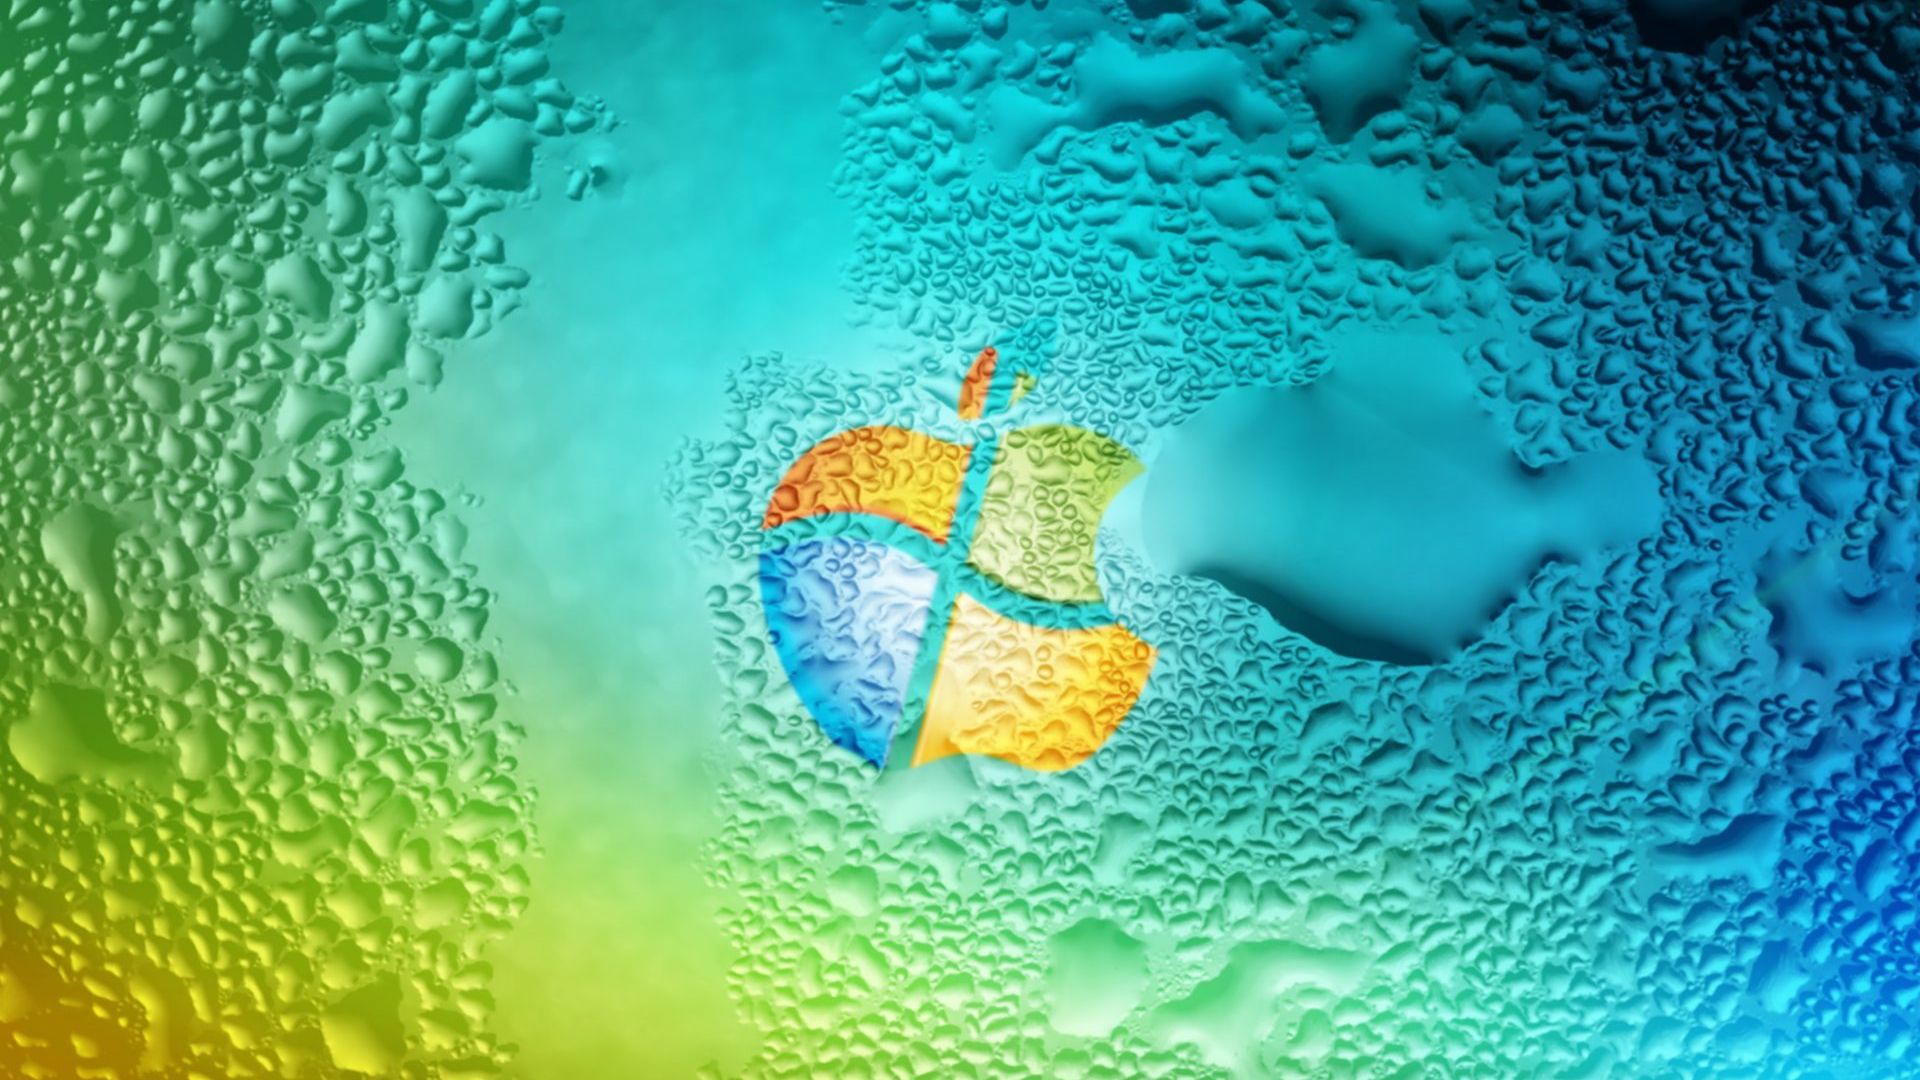 Wet Computer Crossbreed  HD Wallpapers